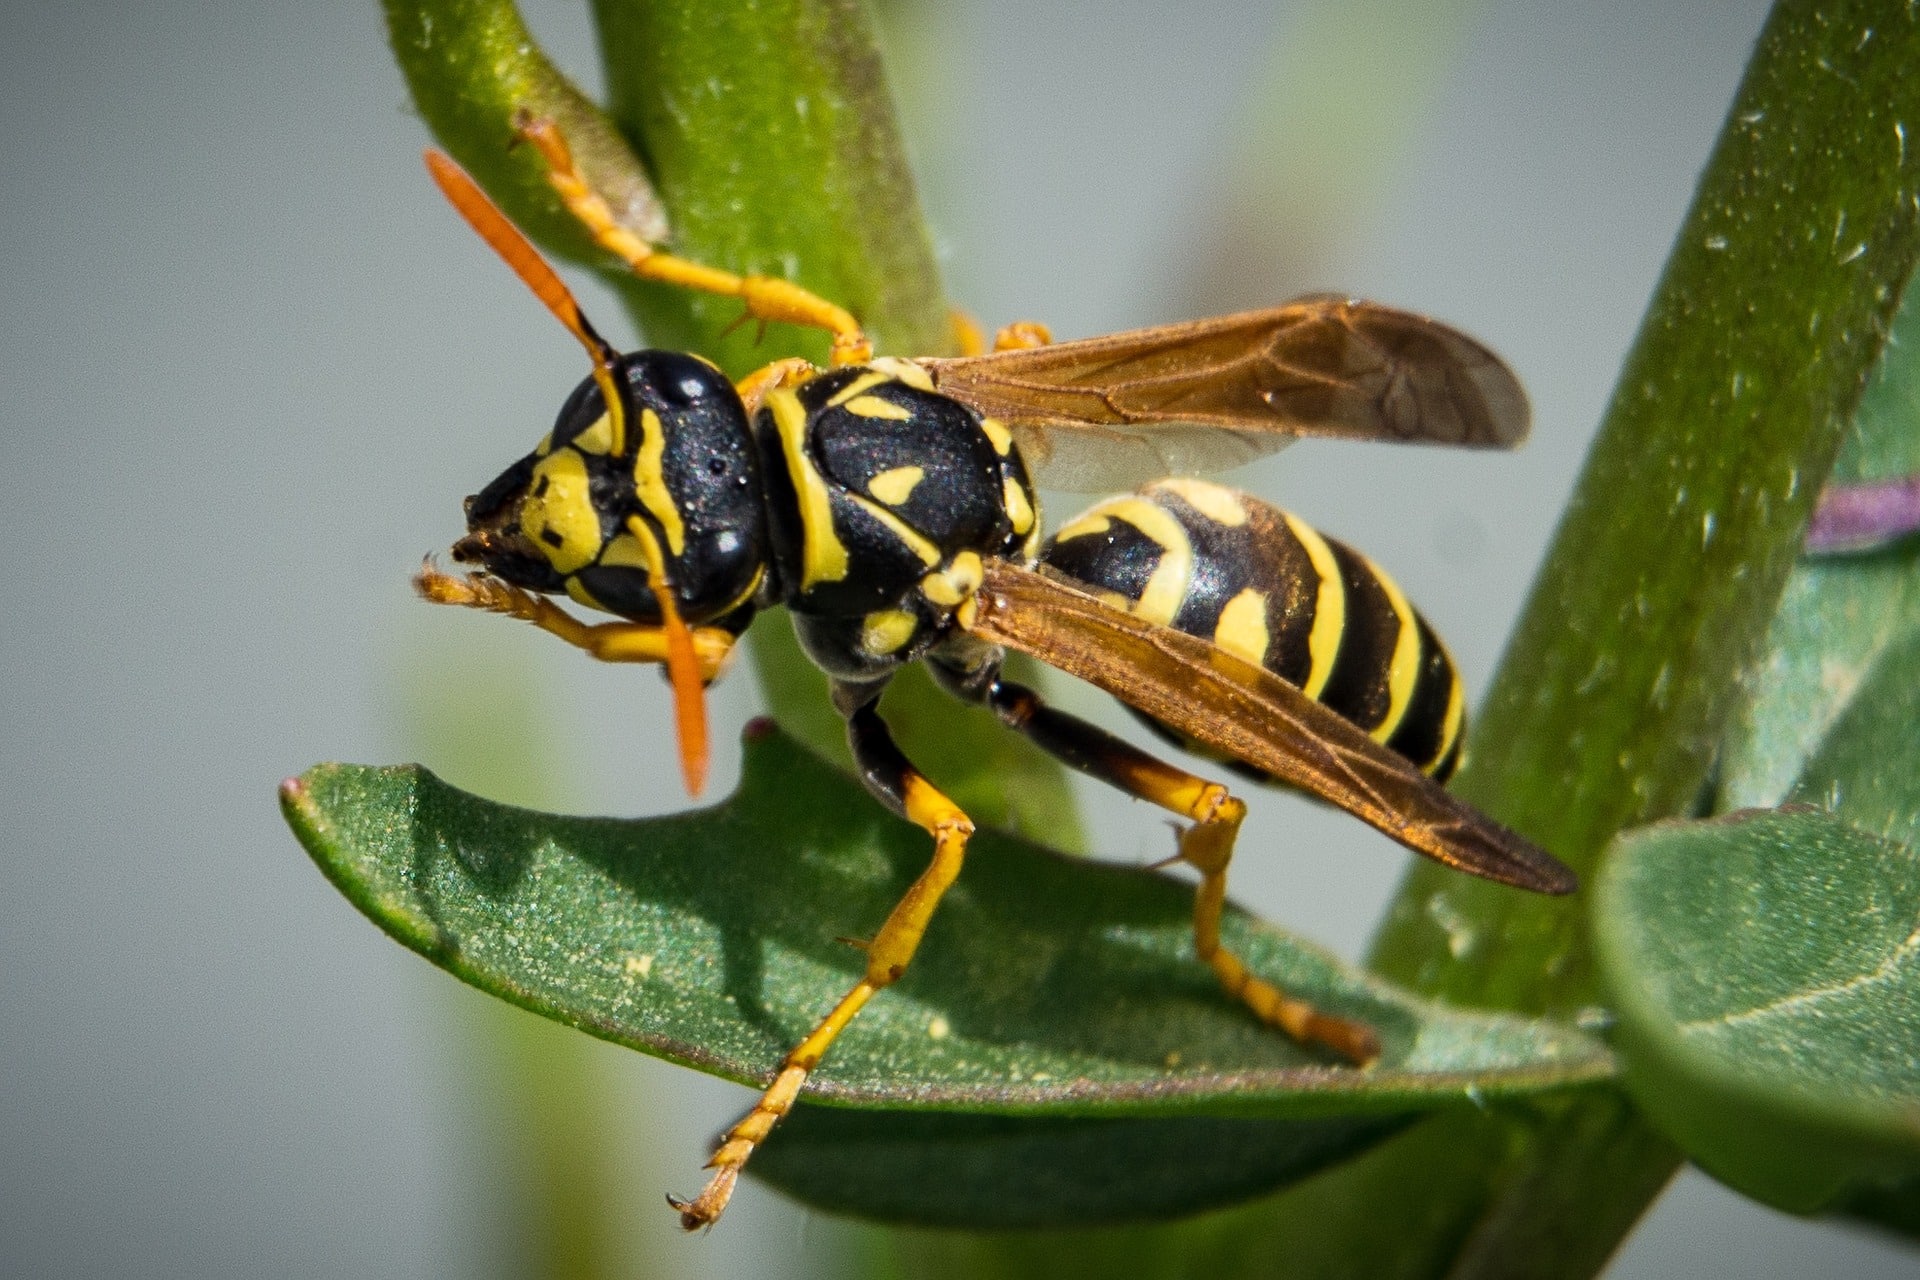 Wasp crawling on leaves of a plant.